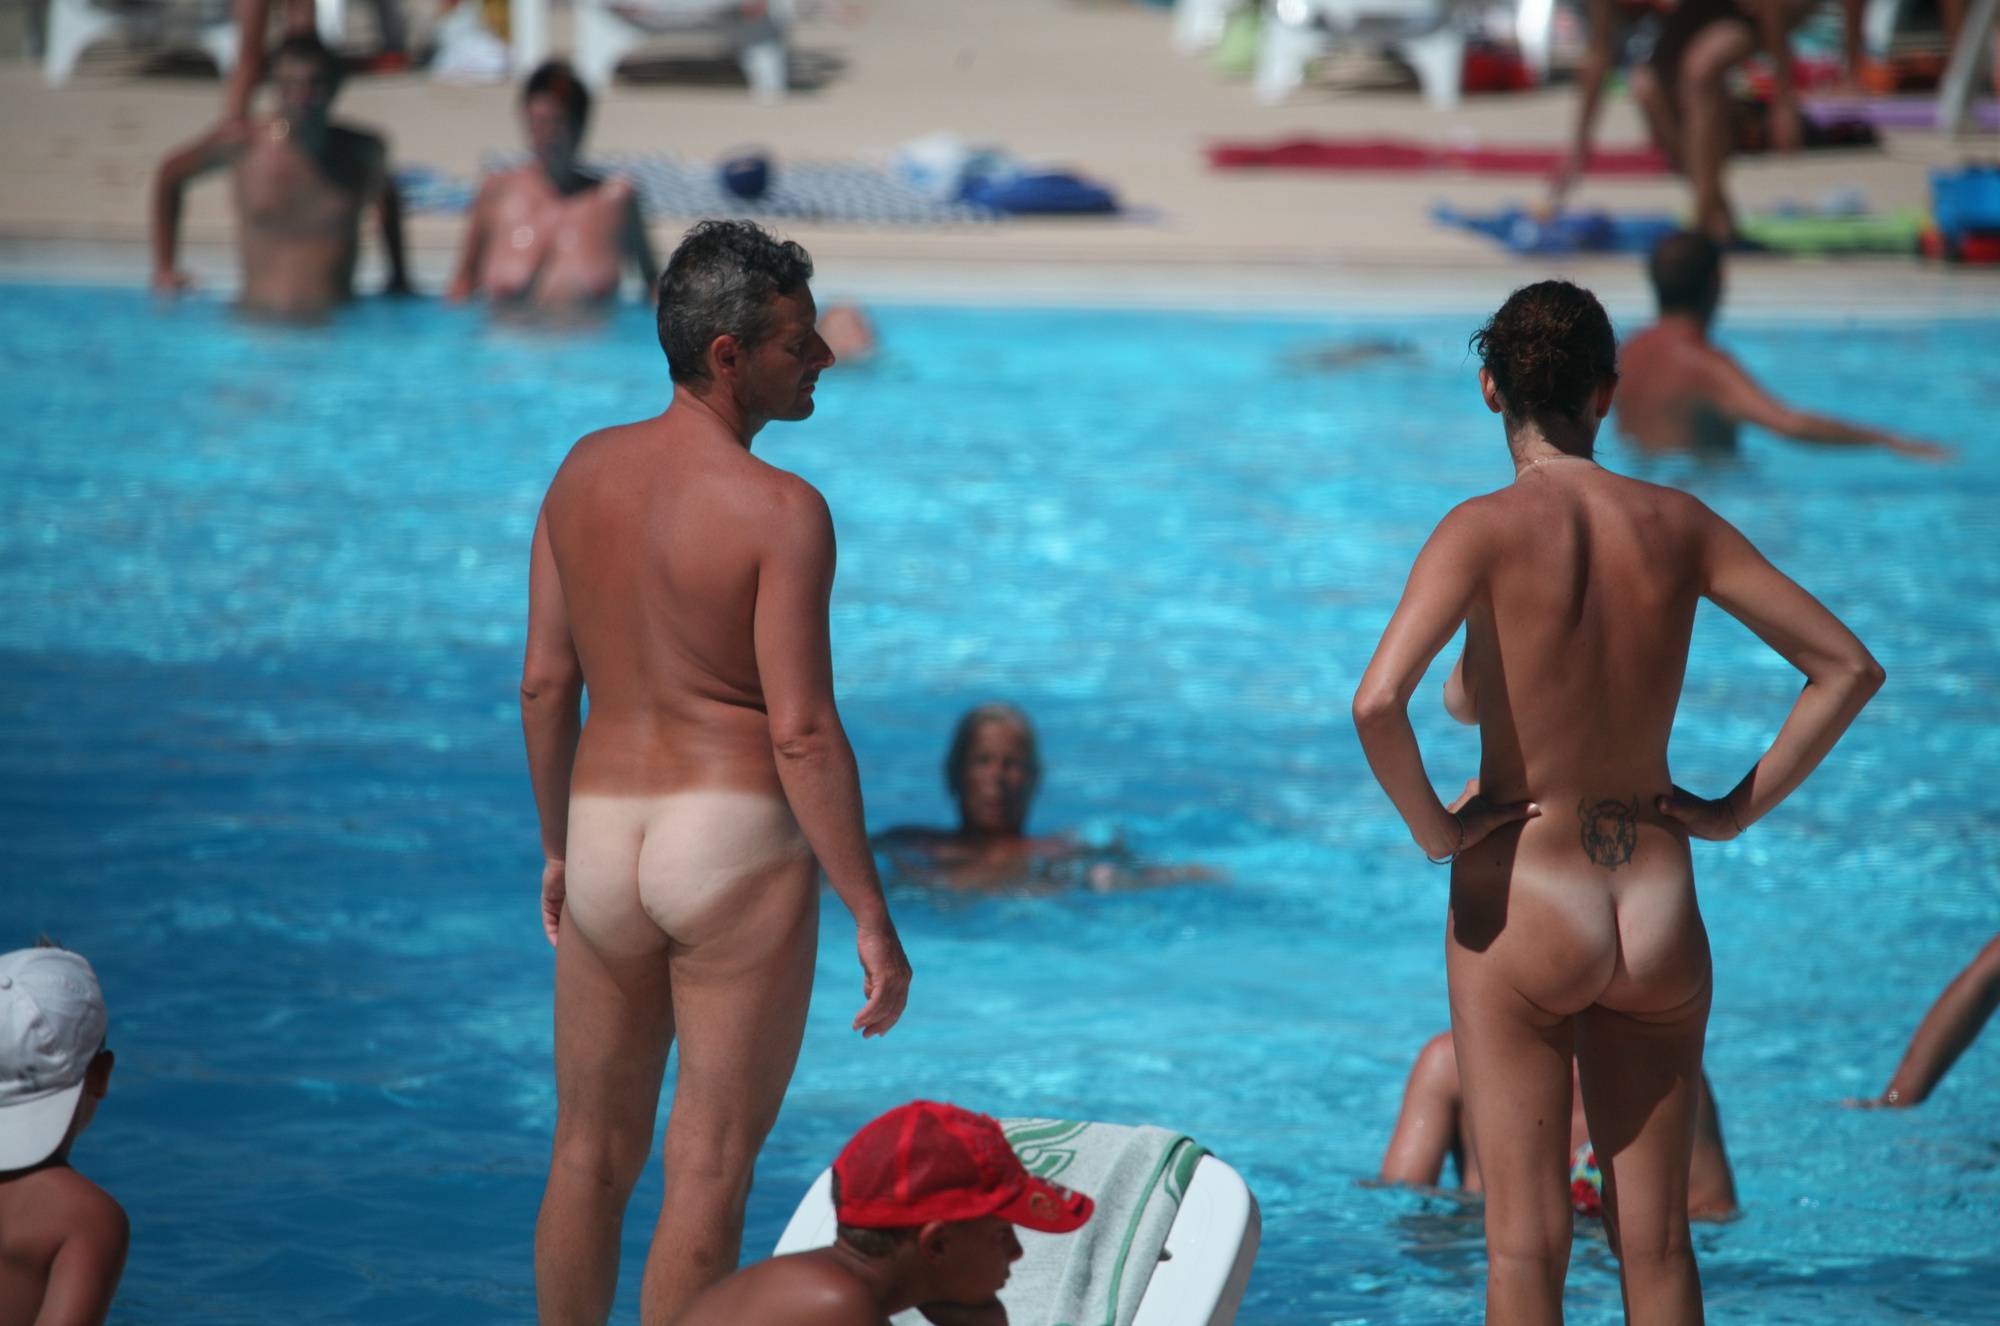 Pure Nudism Pics Pool-Shore Group Exercise - 3